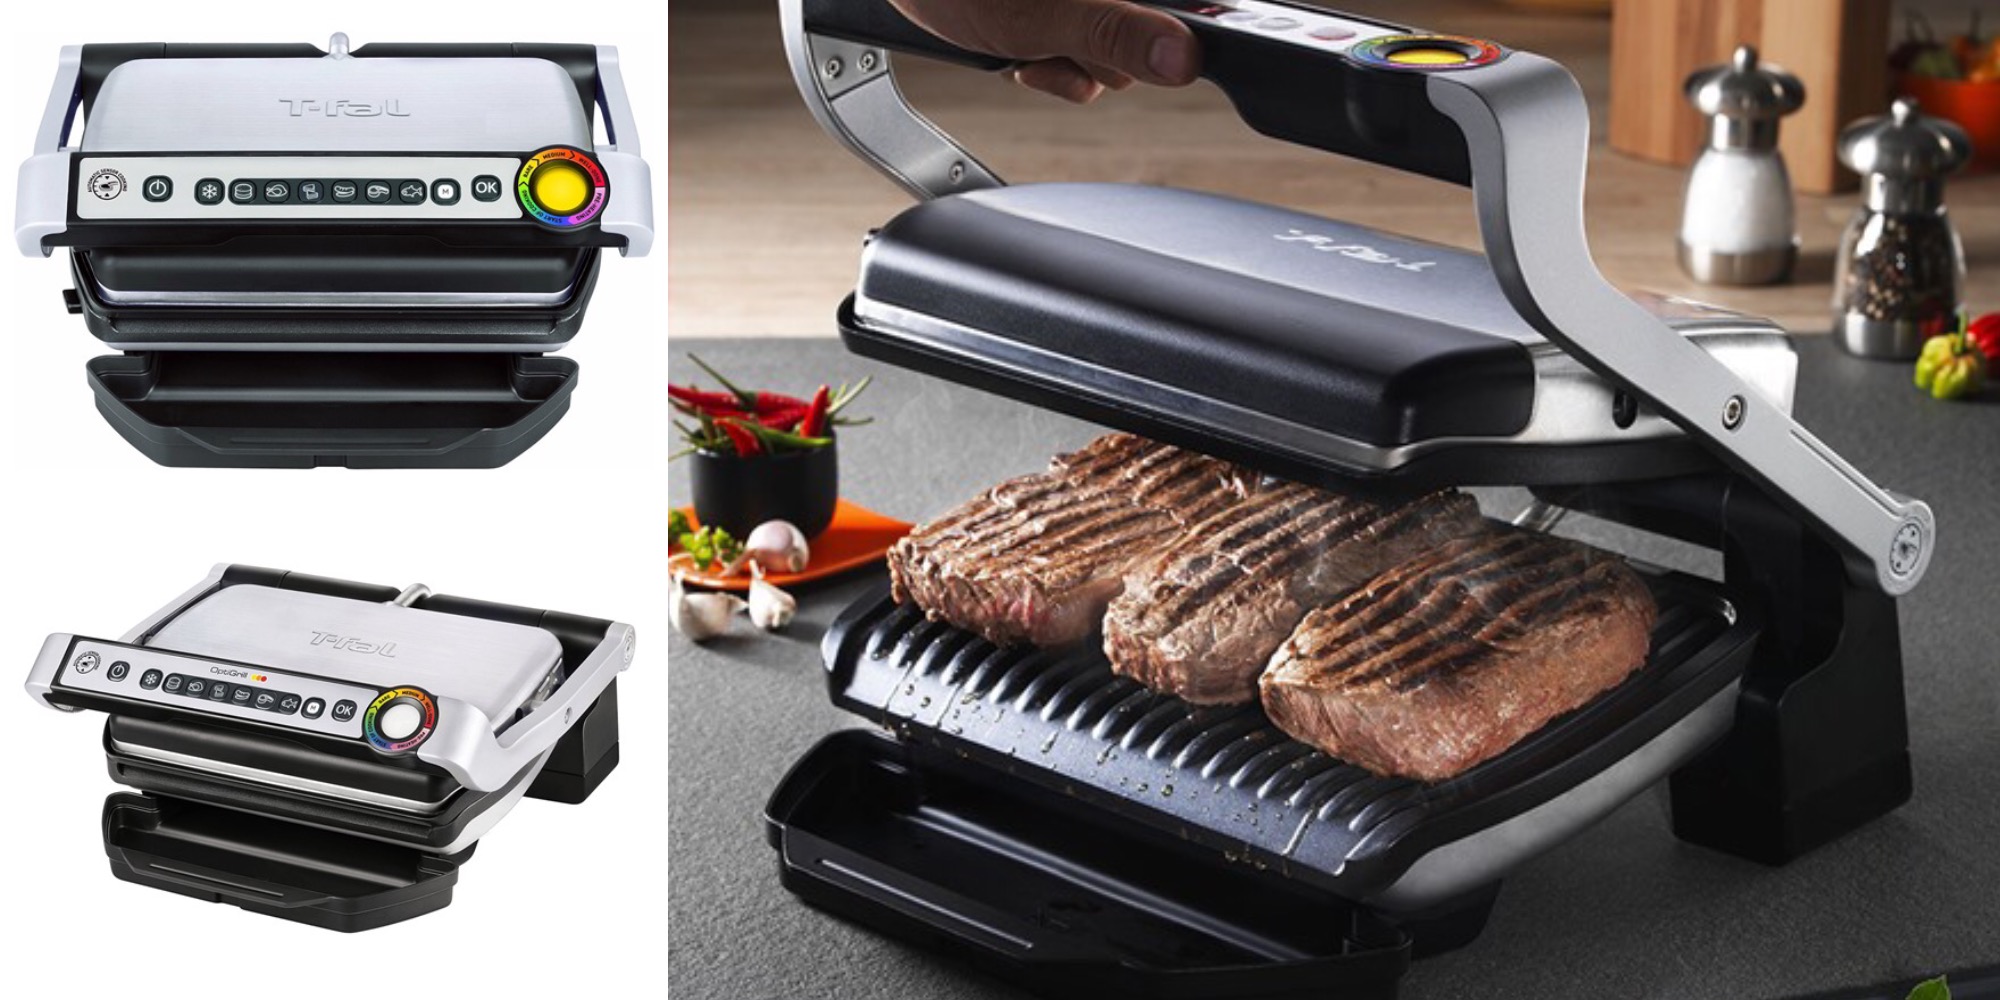 The T-fal Indoor Grill automatically switches cooking cycles: $70 shipped  (30% off)